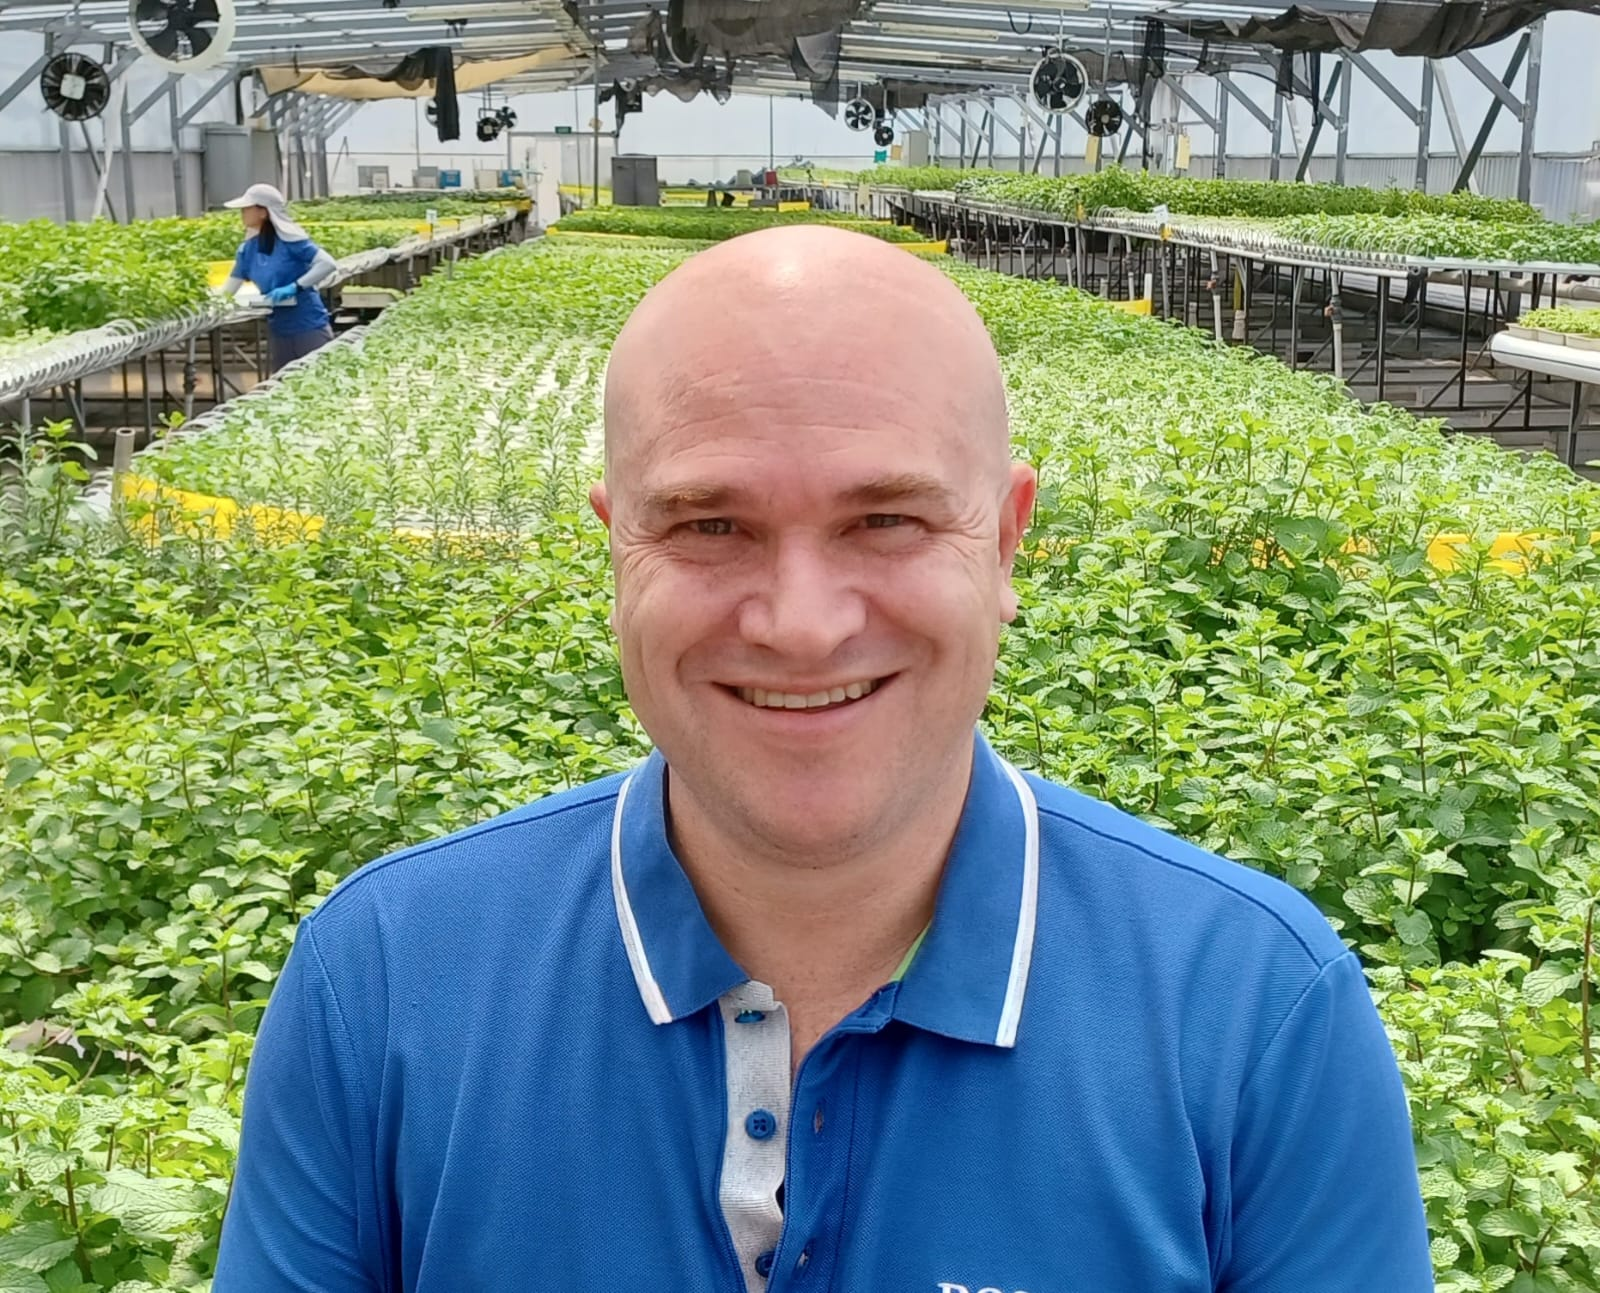 Weekends: Singapore startup ComCrop pushes new frontiers in rooftop farming and food security